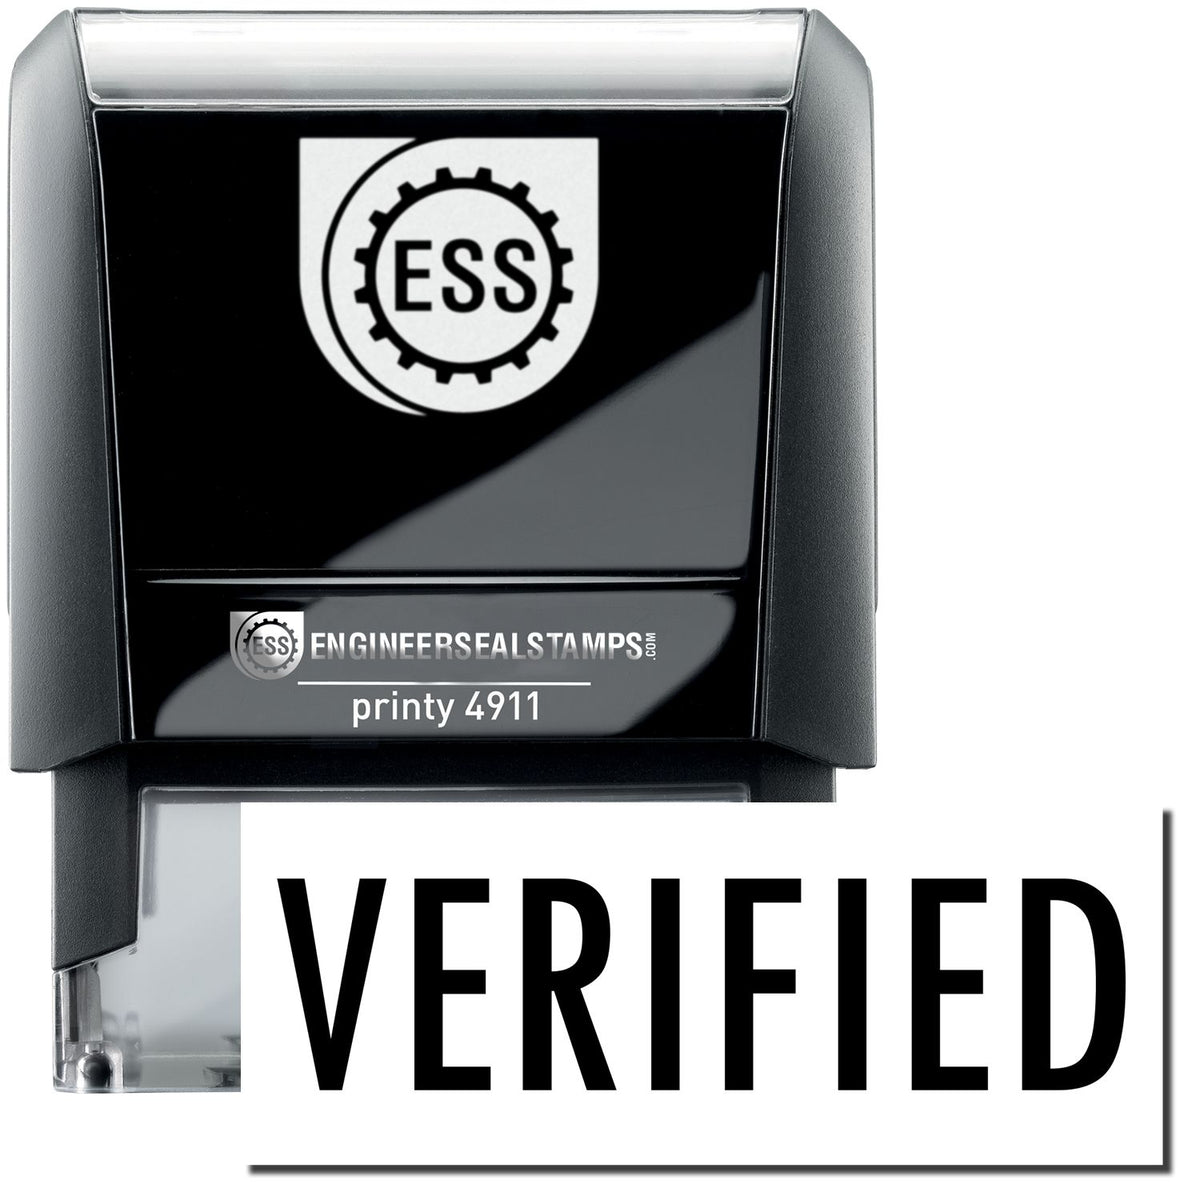 A self-inking stamp with a stamped image showing how the text &quot;VERIFIED&quot; is displayed after stamping.